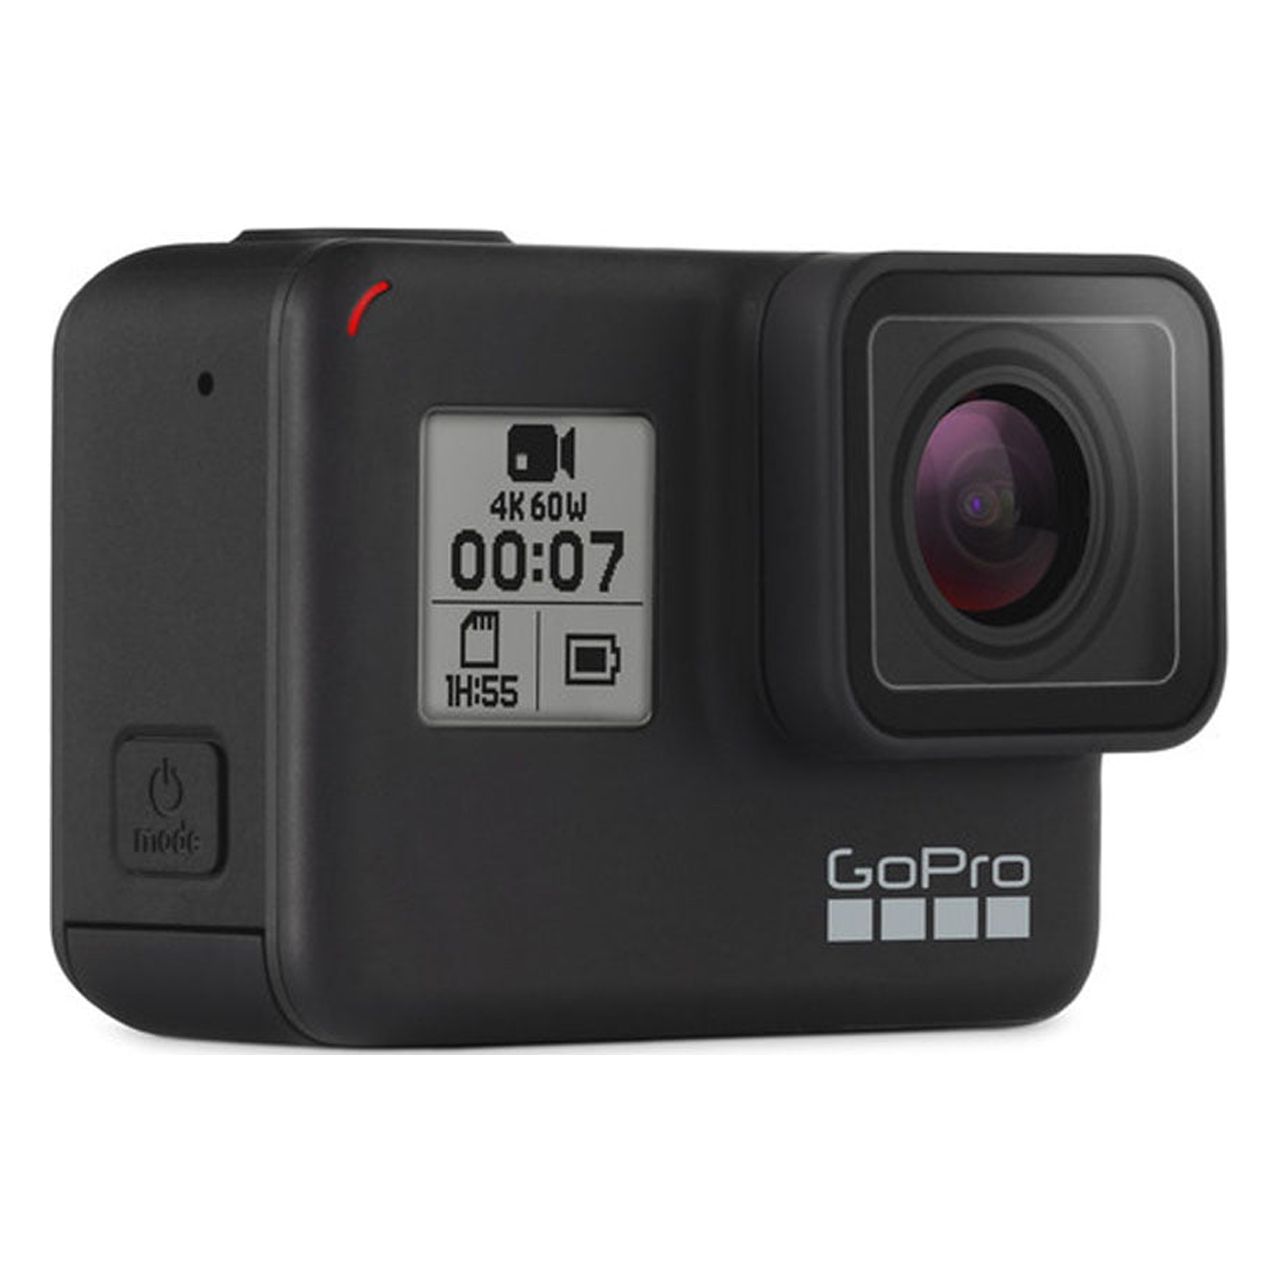 GoPro HERO7 Black Waterproof Action Camera with Touch Screen 4K HD Video 12MP Photos Live Streaming (Newest Model) - image 2 of 7